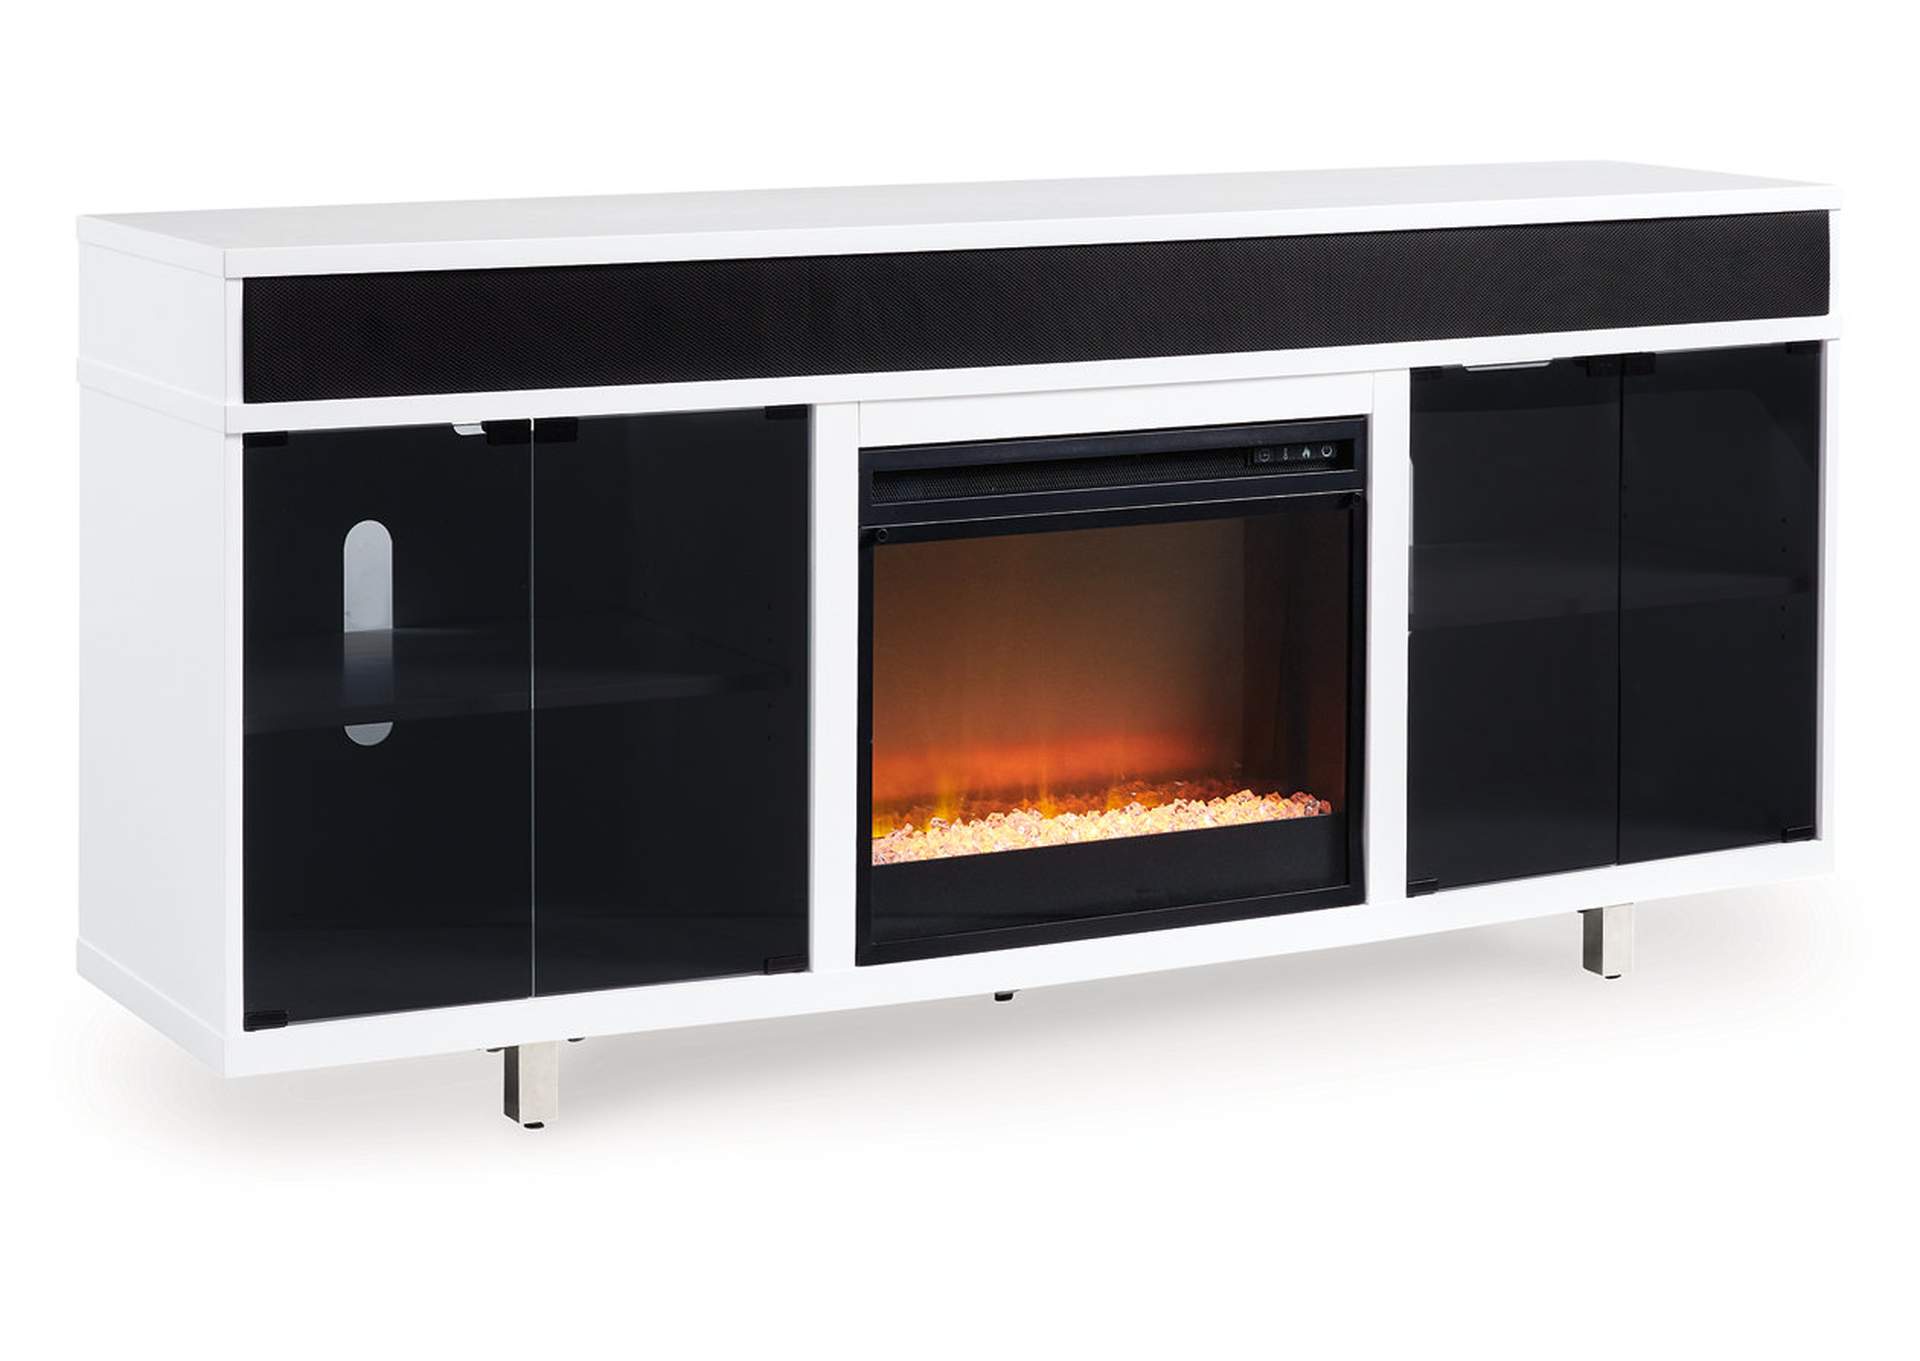 Gardoni 72" TV Stand with Electric Fireplace,Signature Design By Ashley